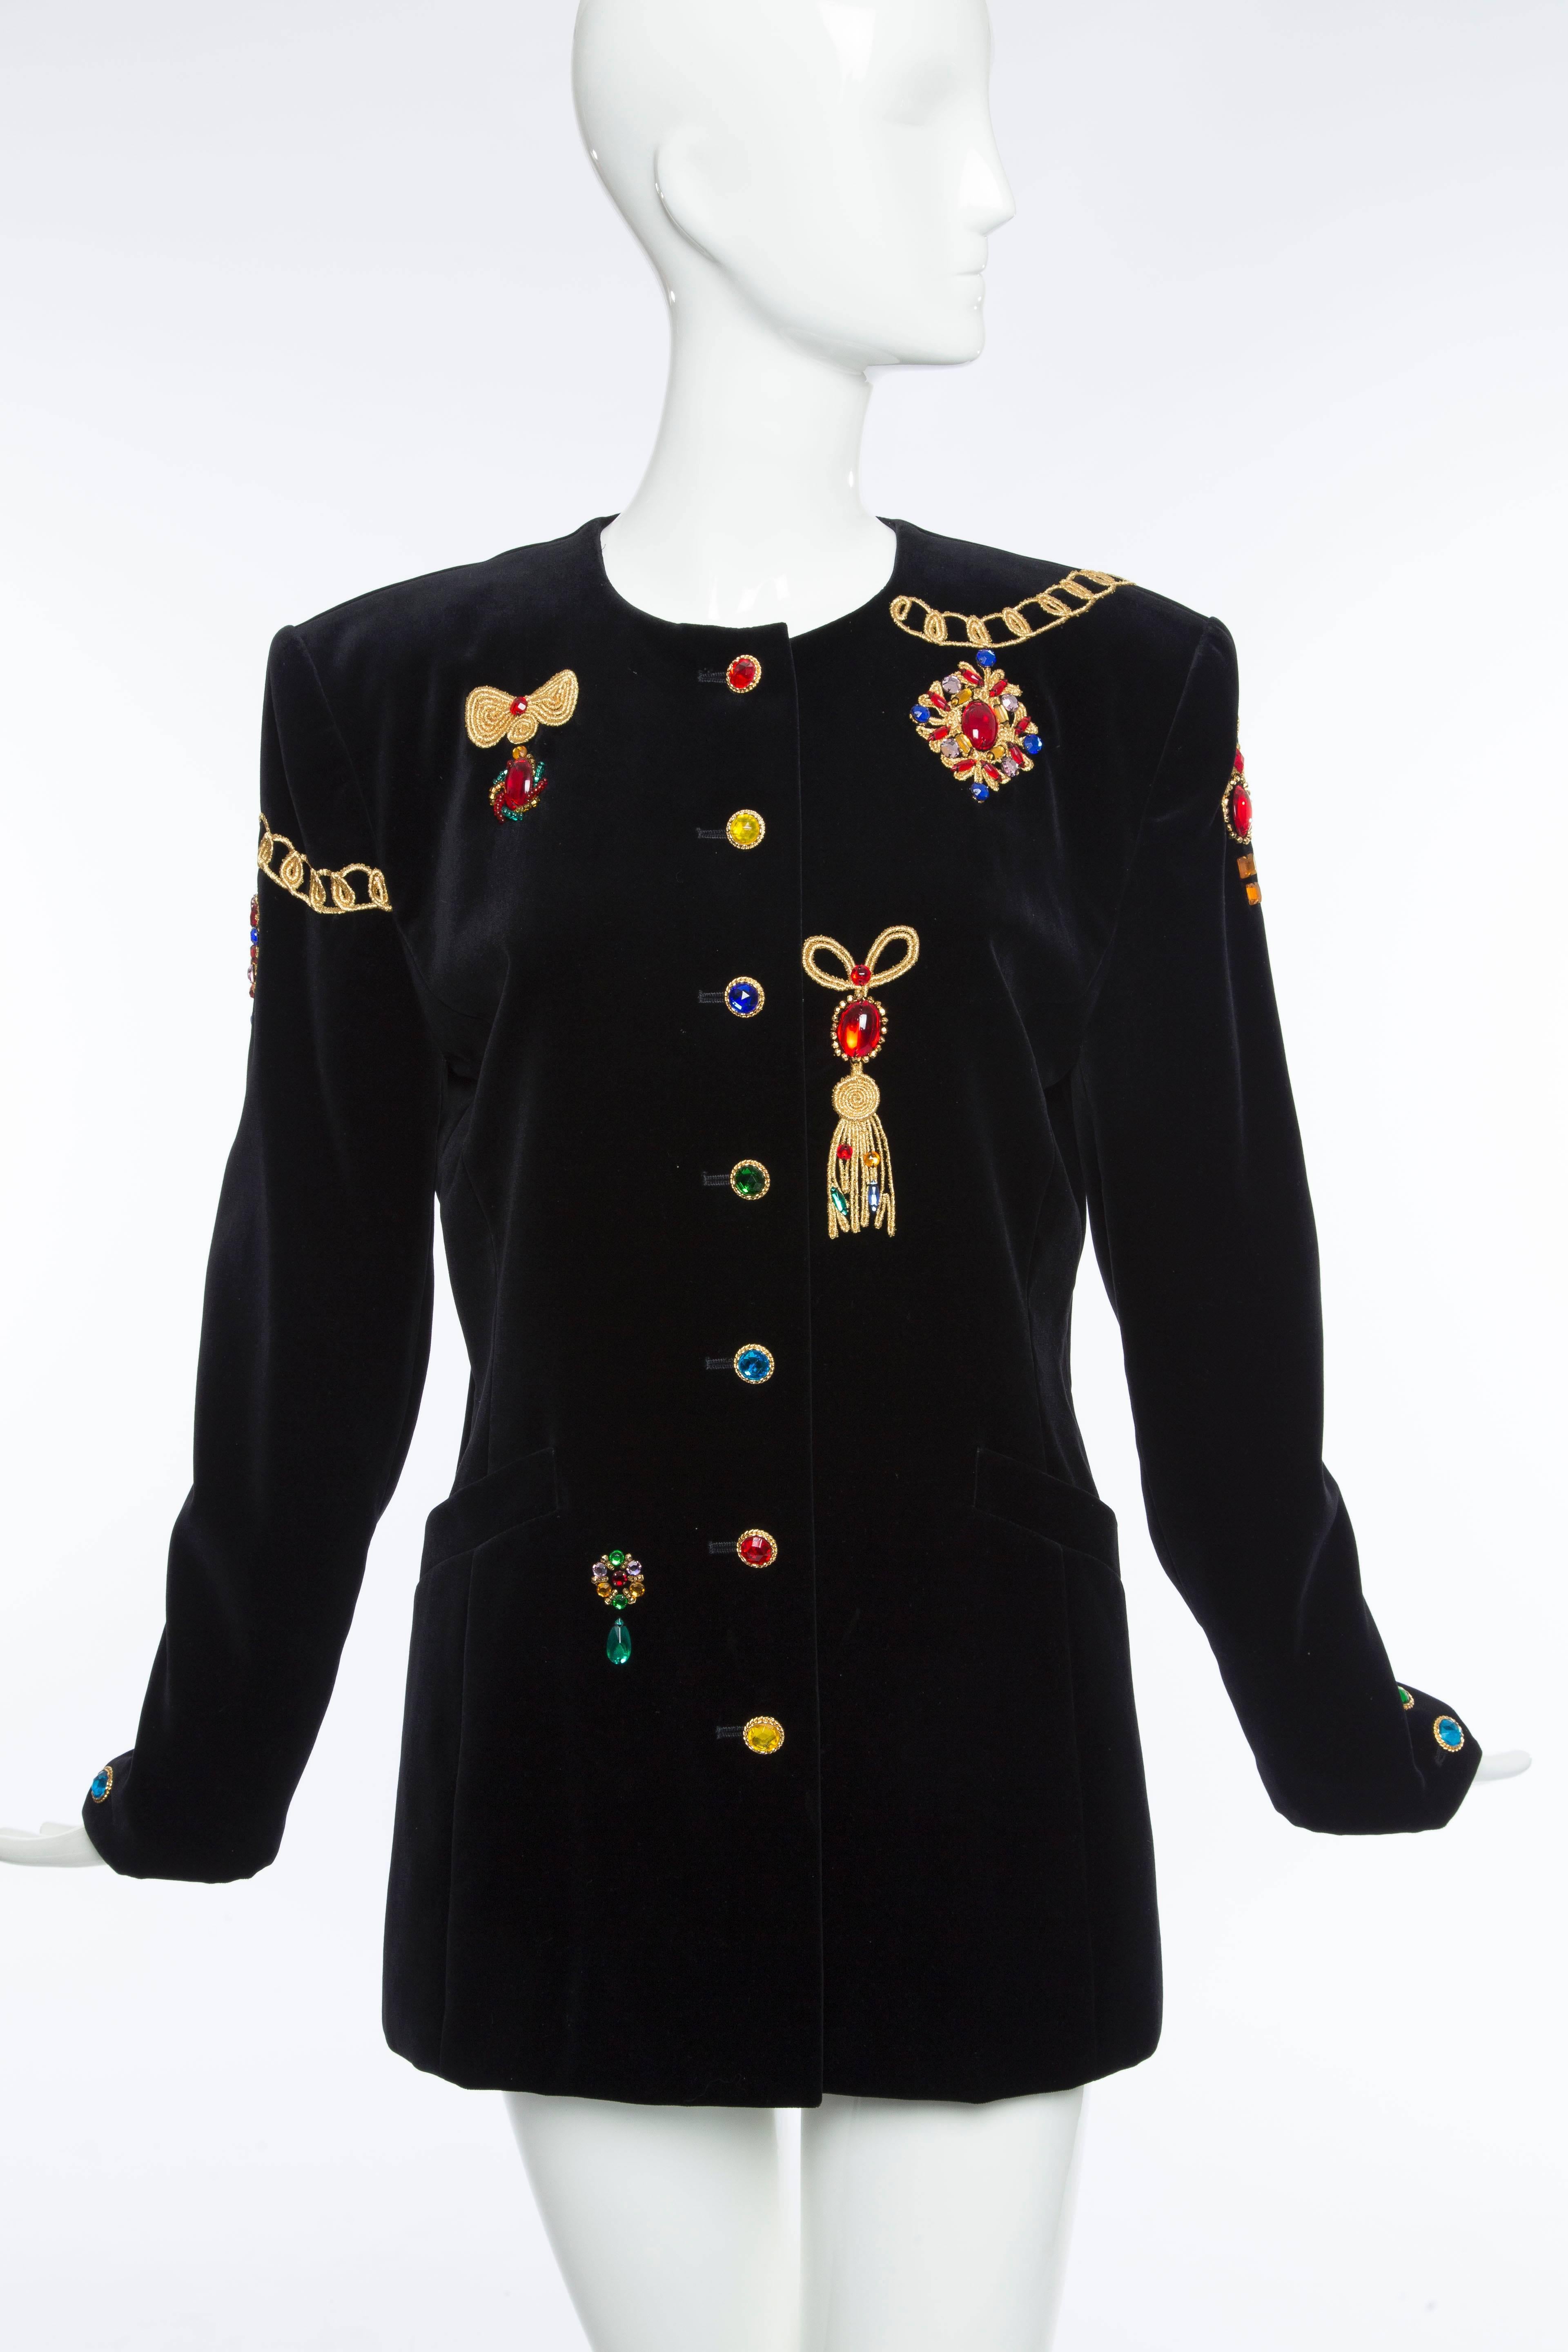 Escada by Margaretha Ley, Circa 1980's, black velvet jacket with polychrome prong set stones and buttons, two front pockets and fully lined.

Bust 39, Waist 34, Hips 38, Length 29.5